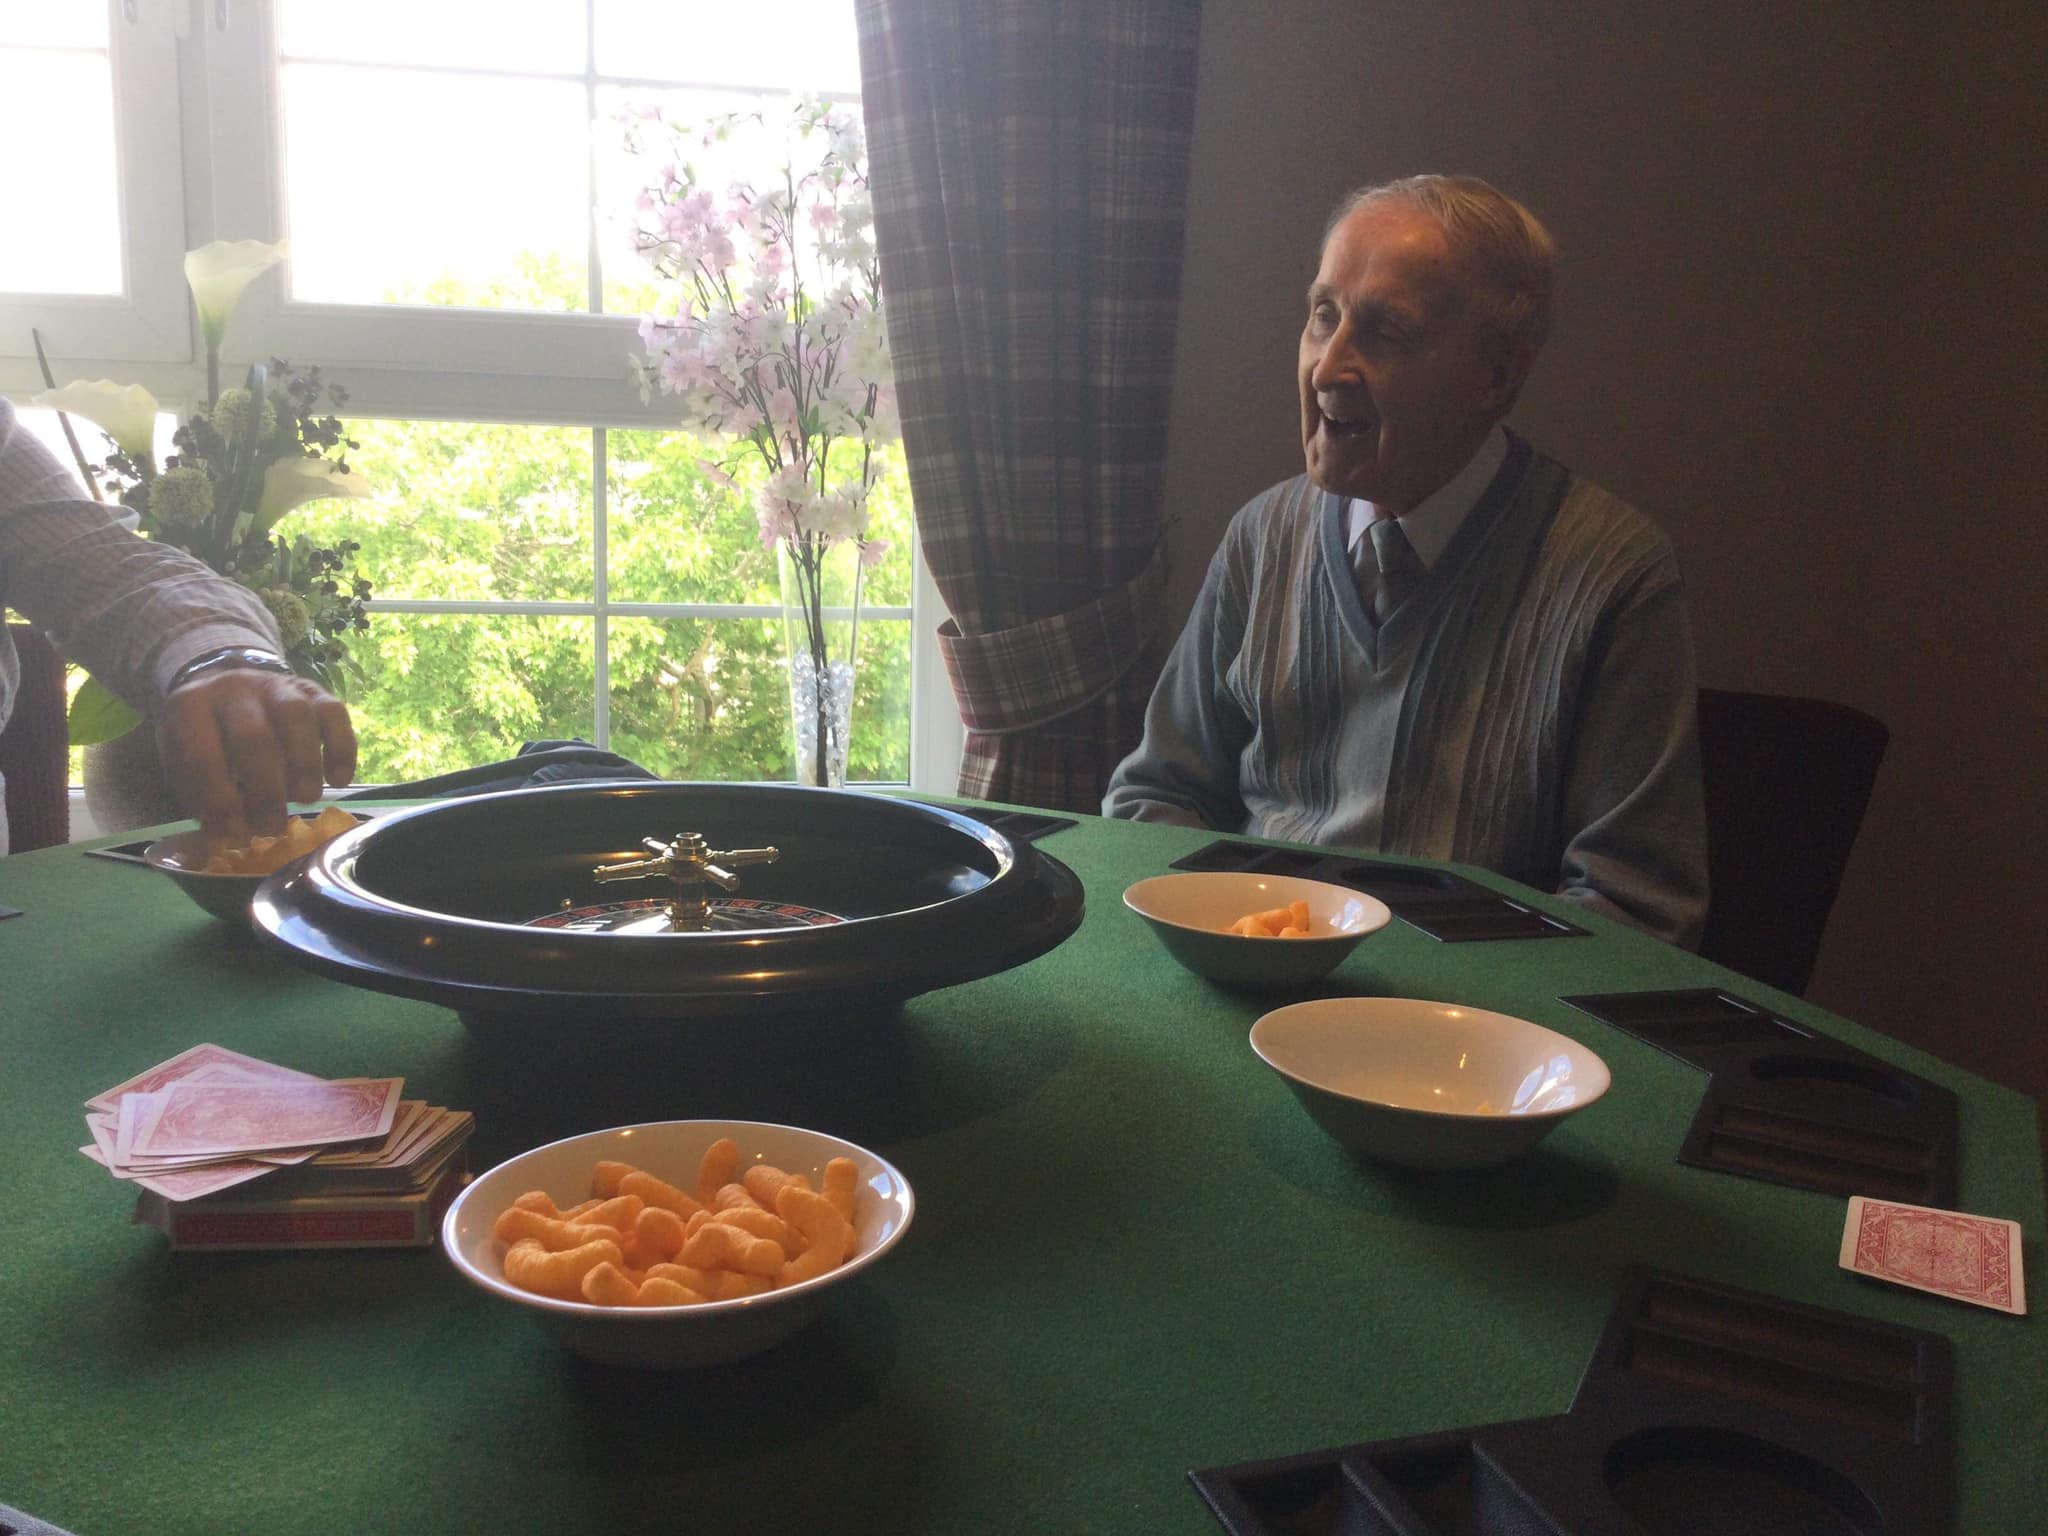 Residents Playing Casino Games with Snacks